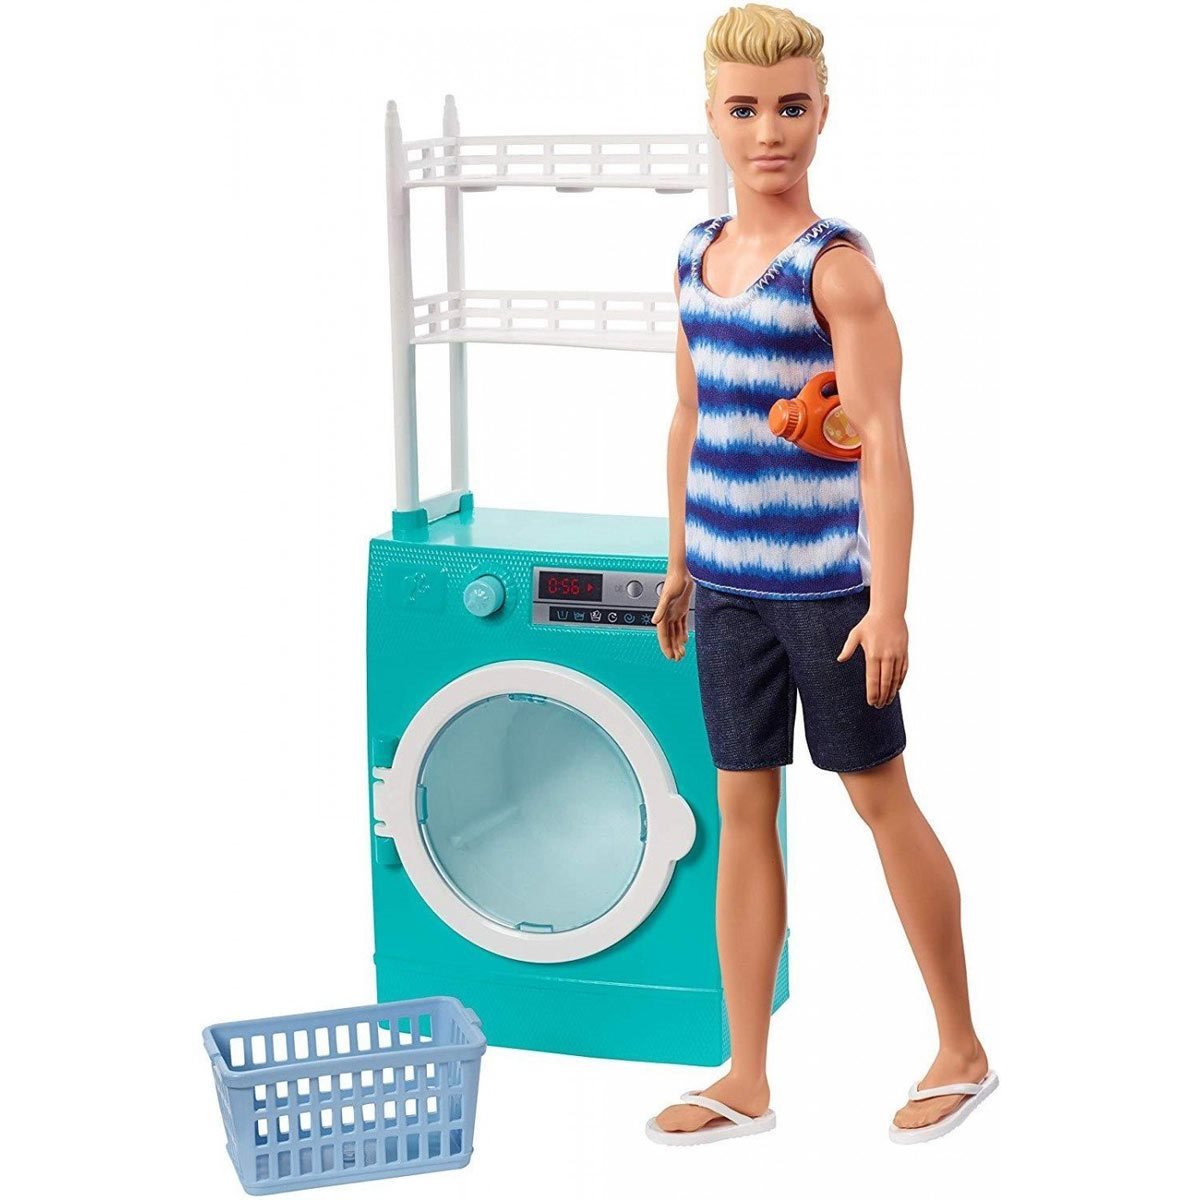 The Barbie washing machine comes with Ken, not Barbie : r